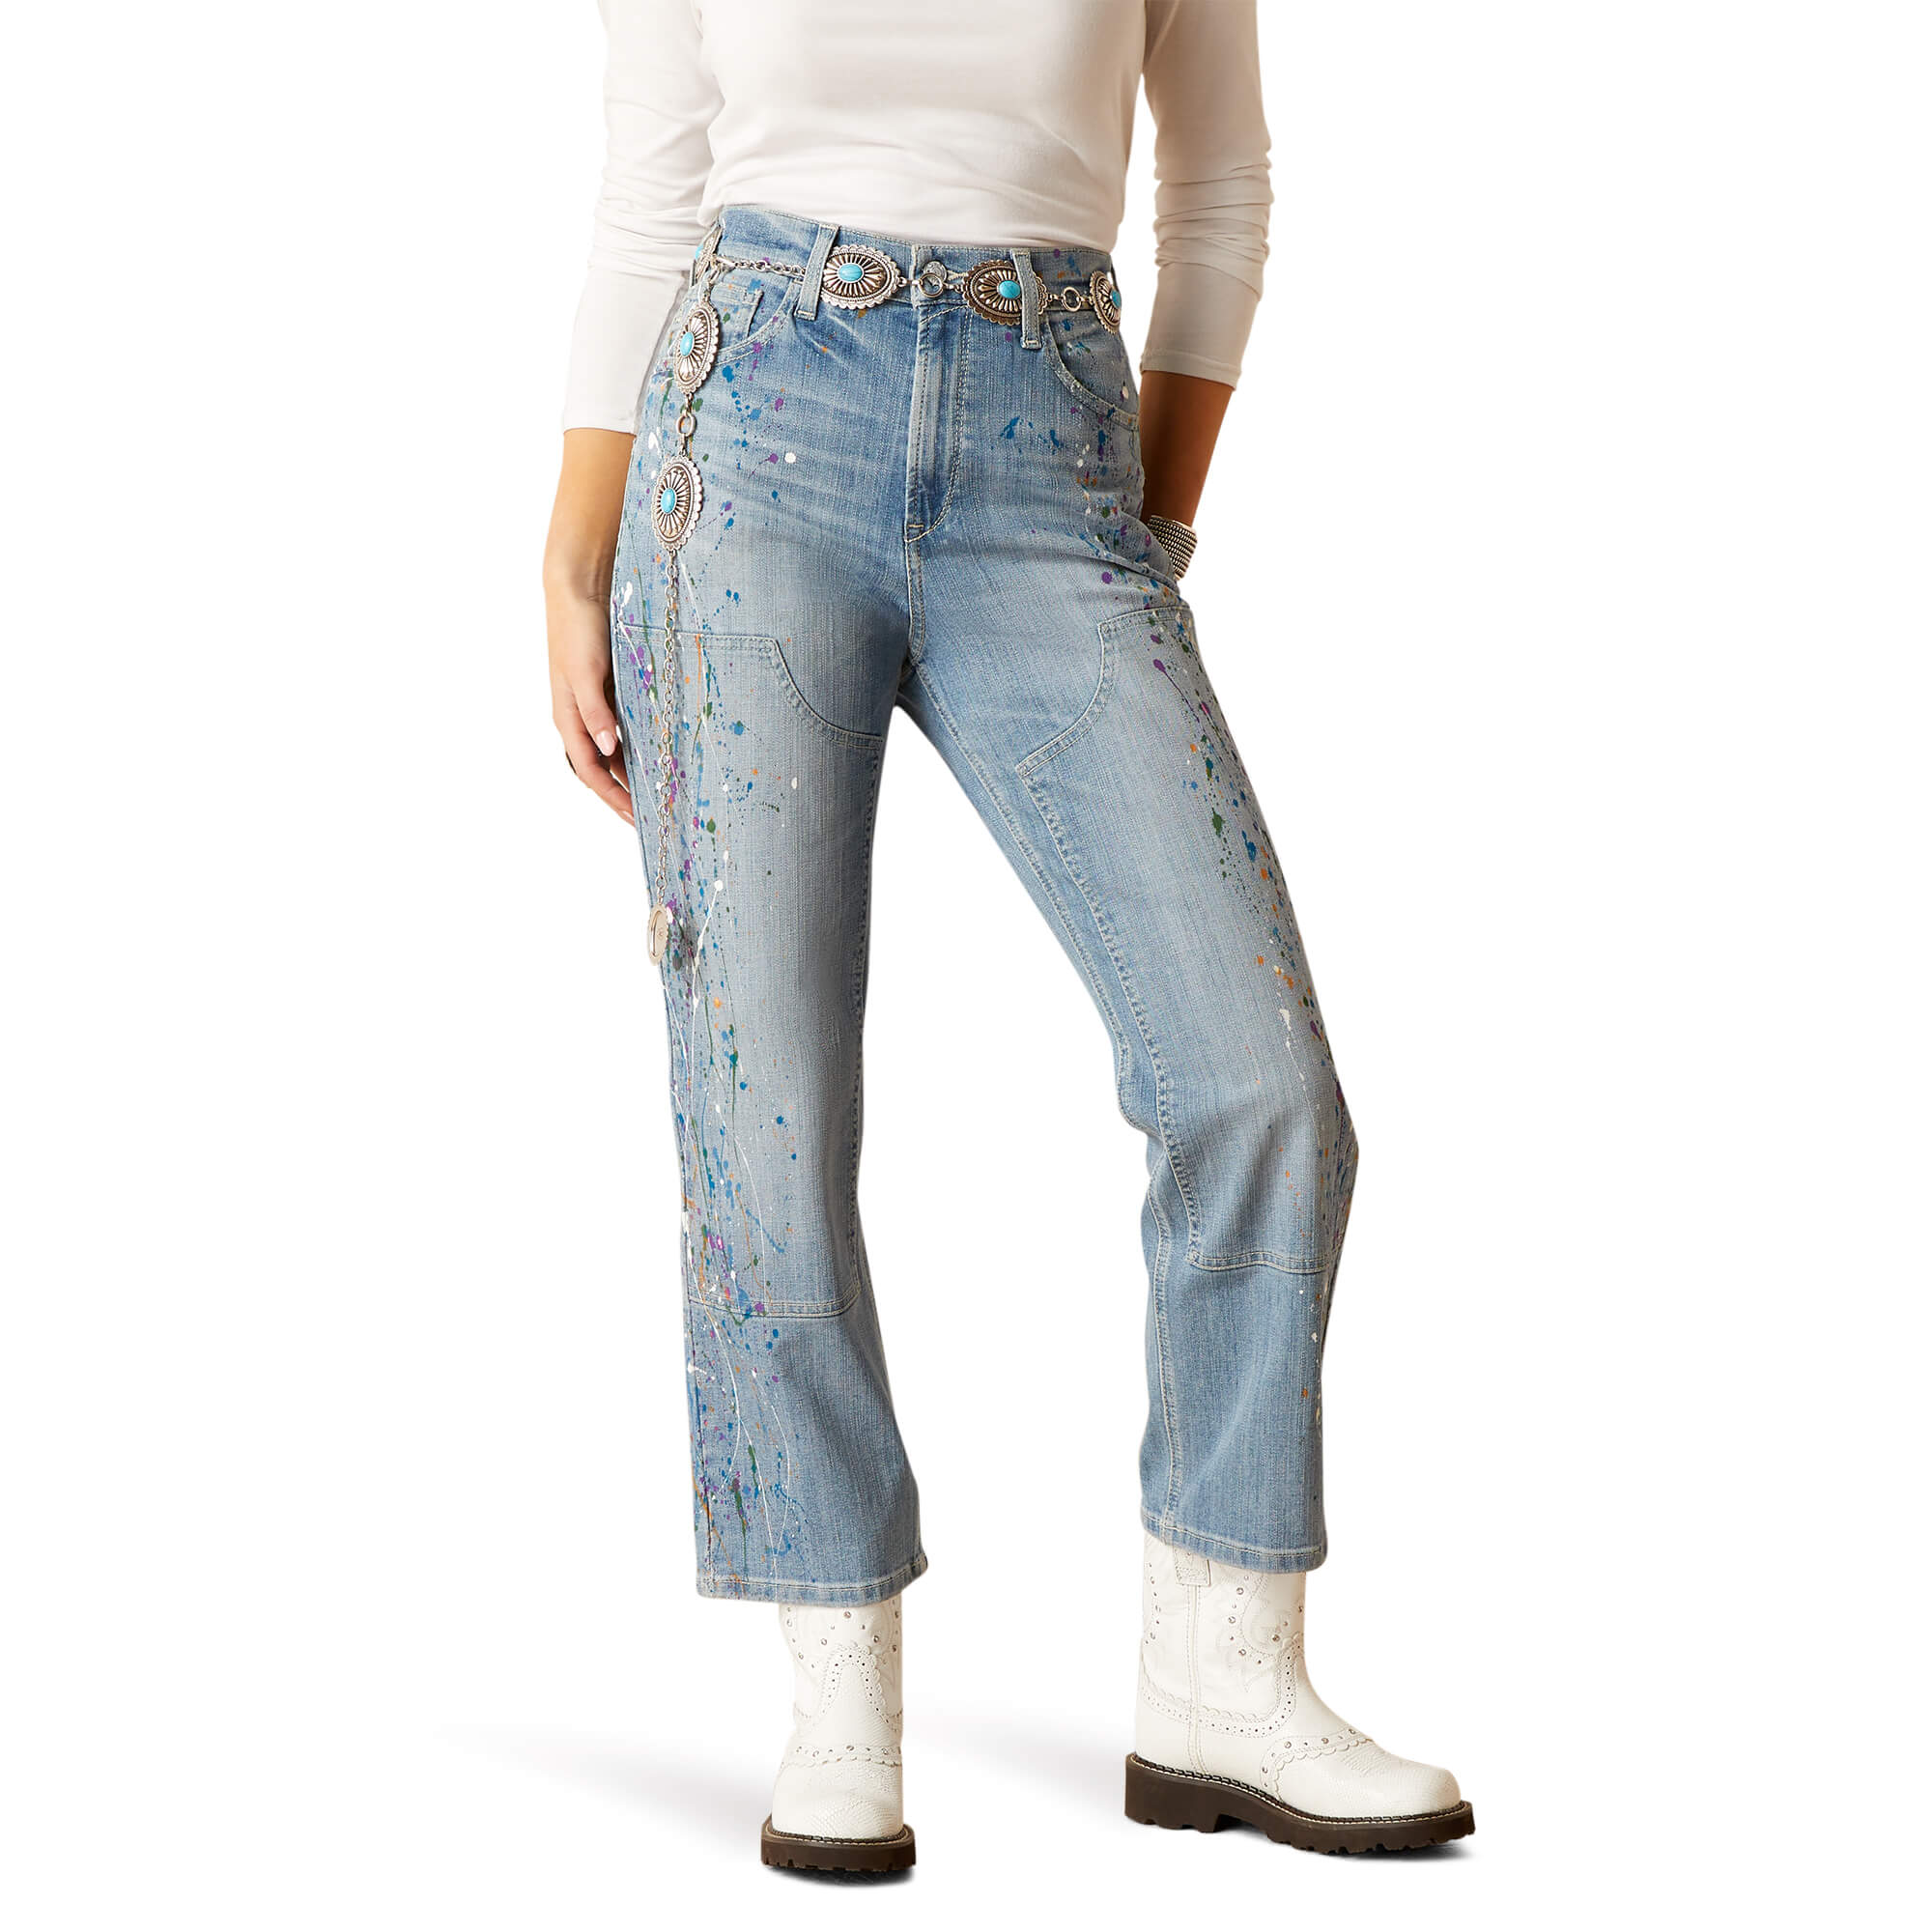 Women's Ariat Ultra High Rise Relaxed Straight Leg Jeans